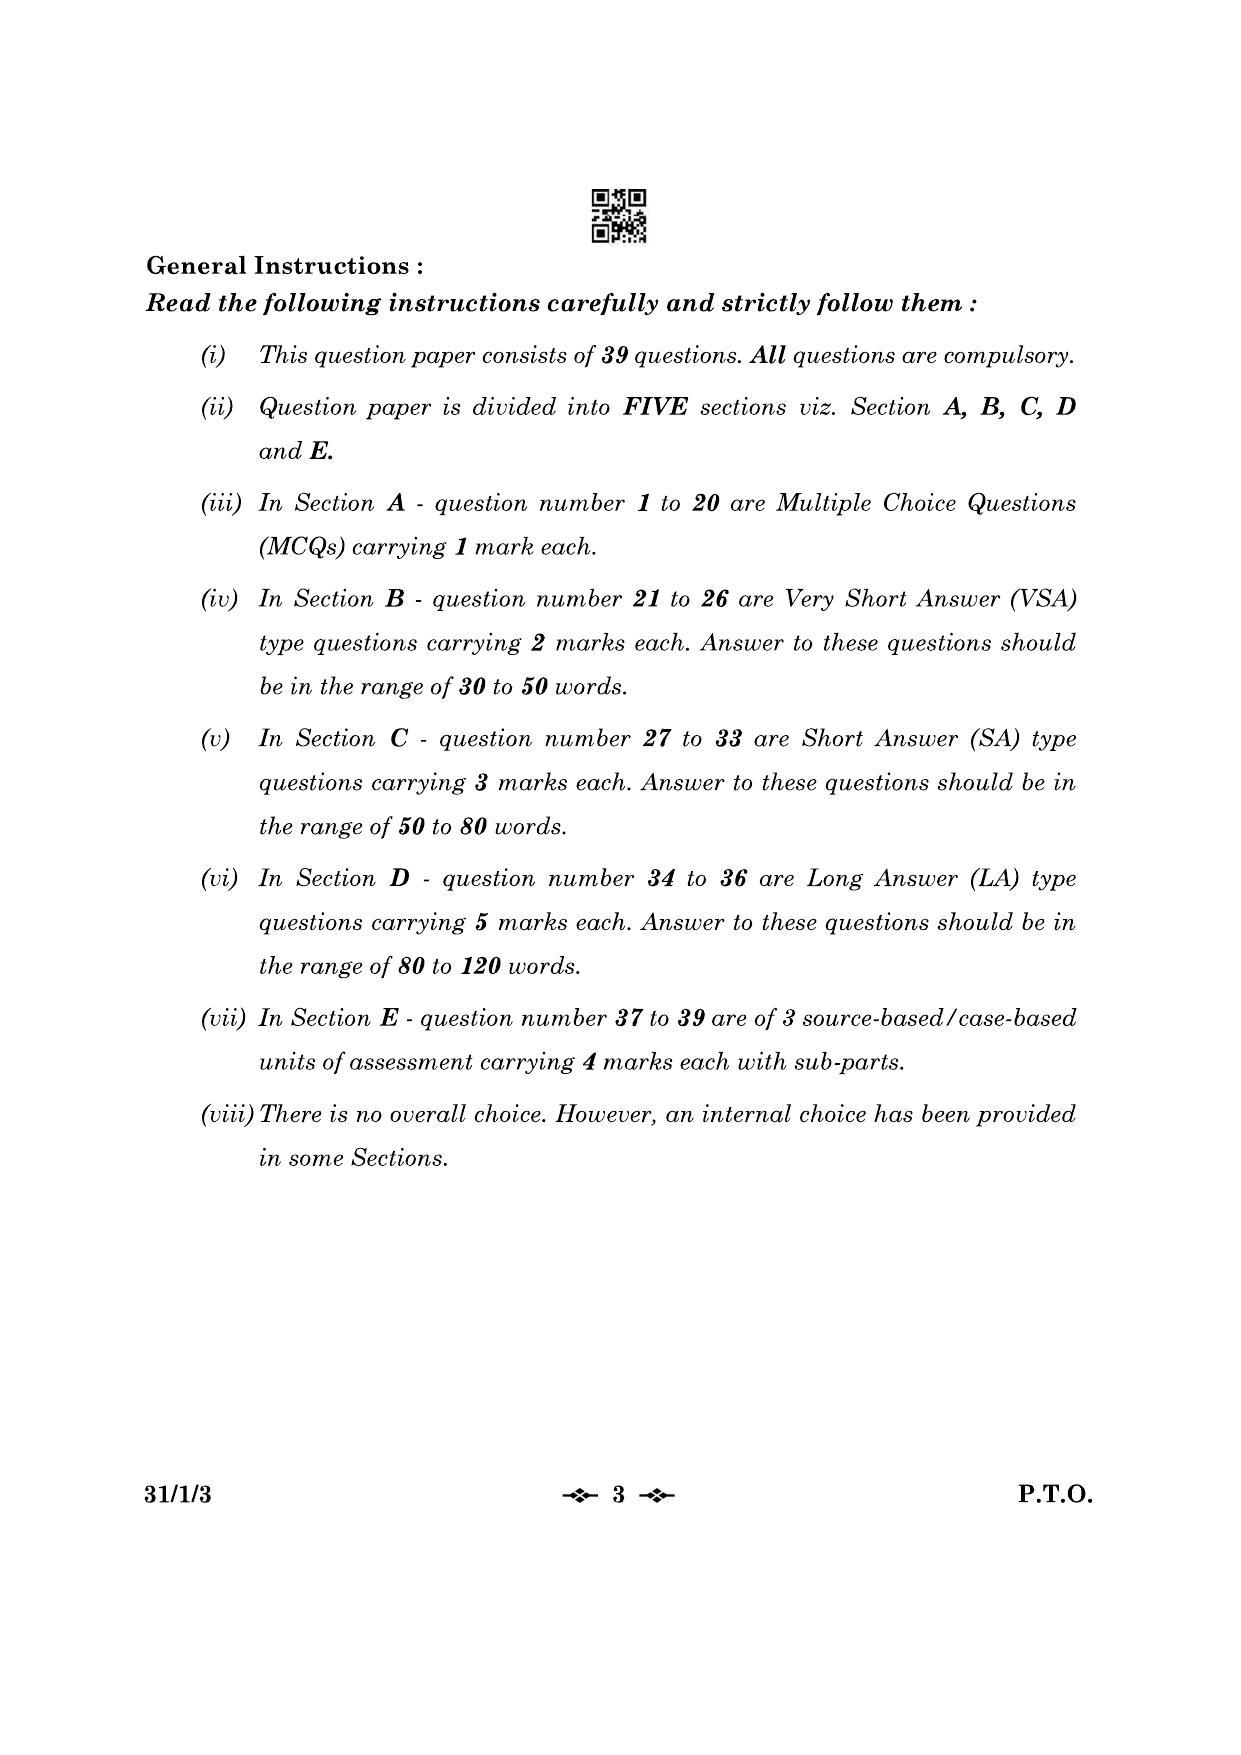 CBSE Class 10 31-1-3 Science 2023 Question Paper - Page 3